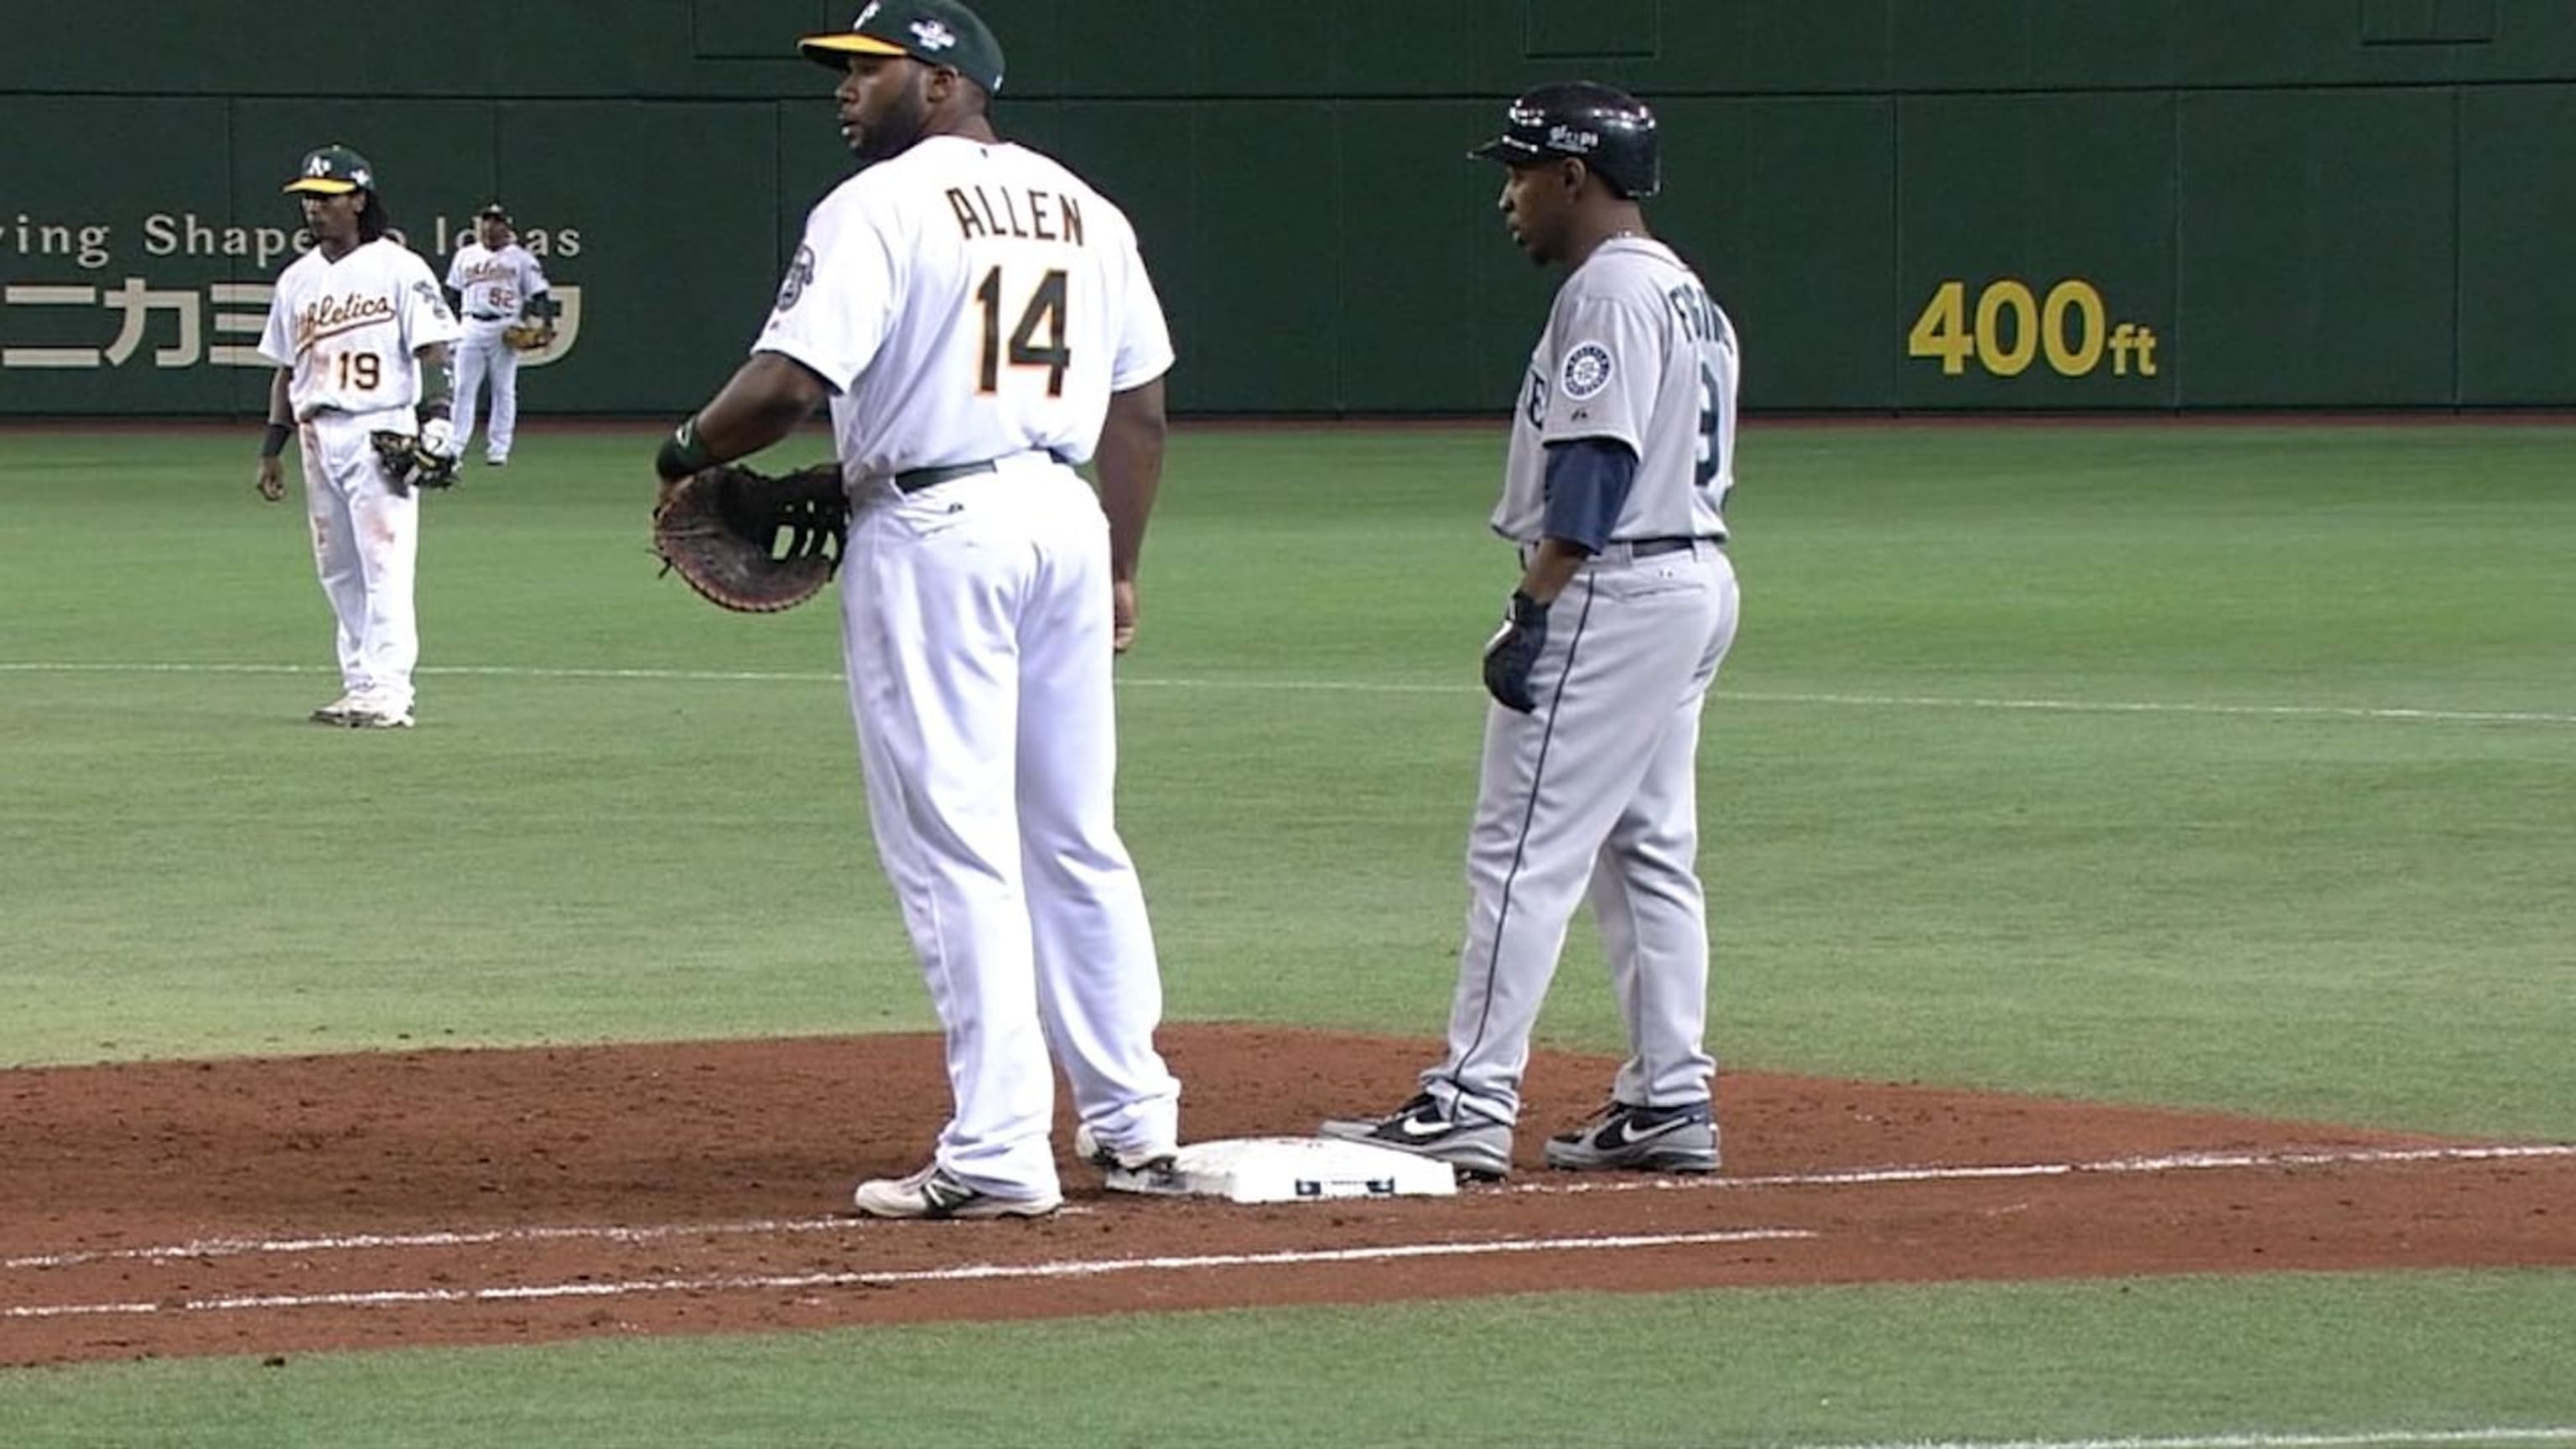 Mariners played Athletics in Japan in 2012